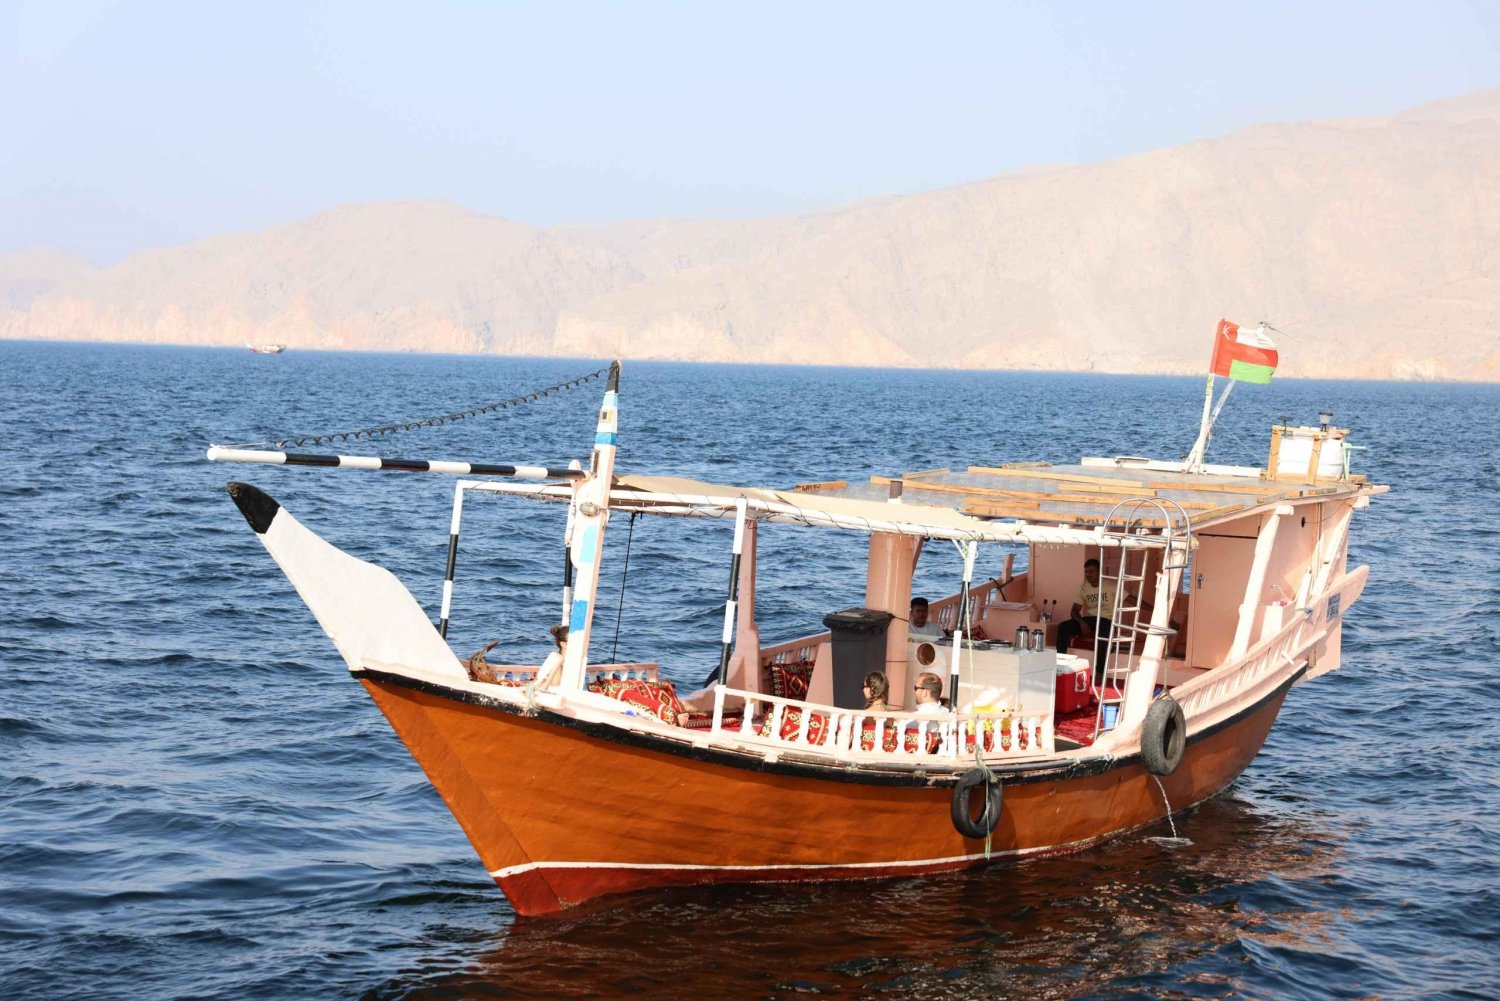 Khasab: Half Day Dhow Cruise, Dolphin Watching, Snorkeling